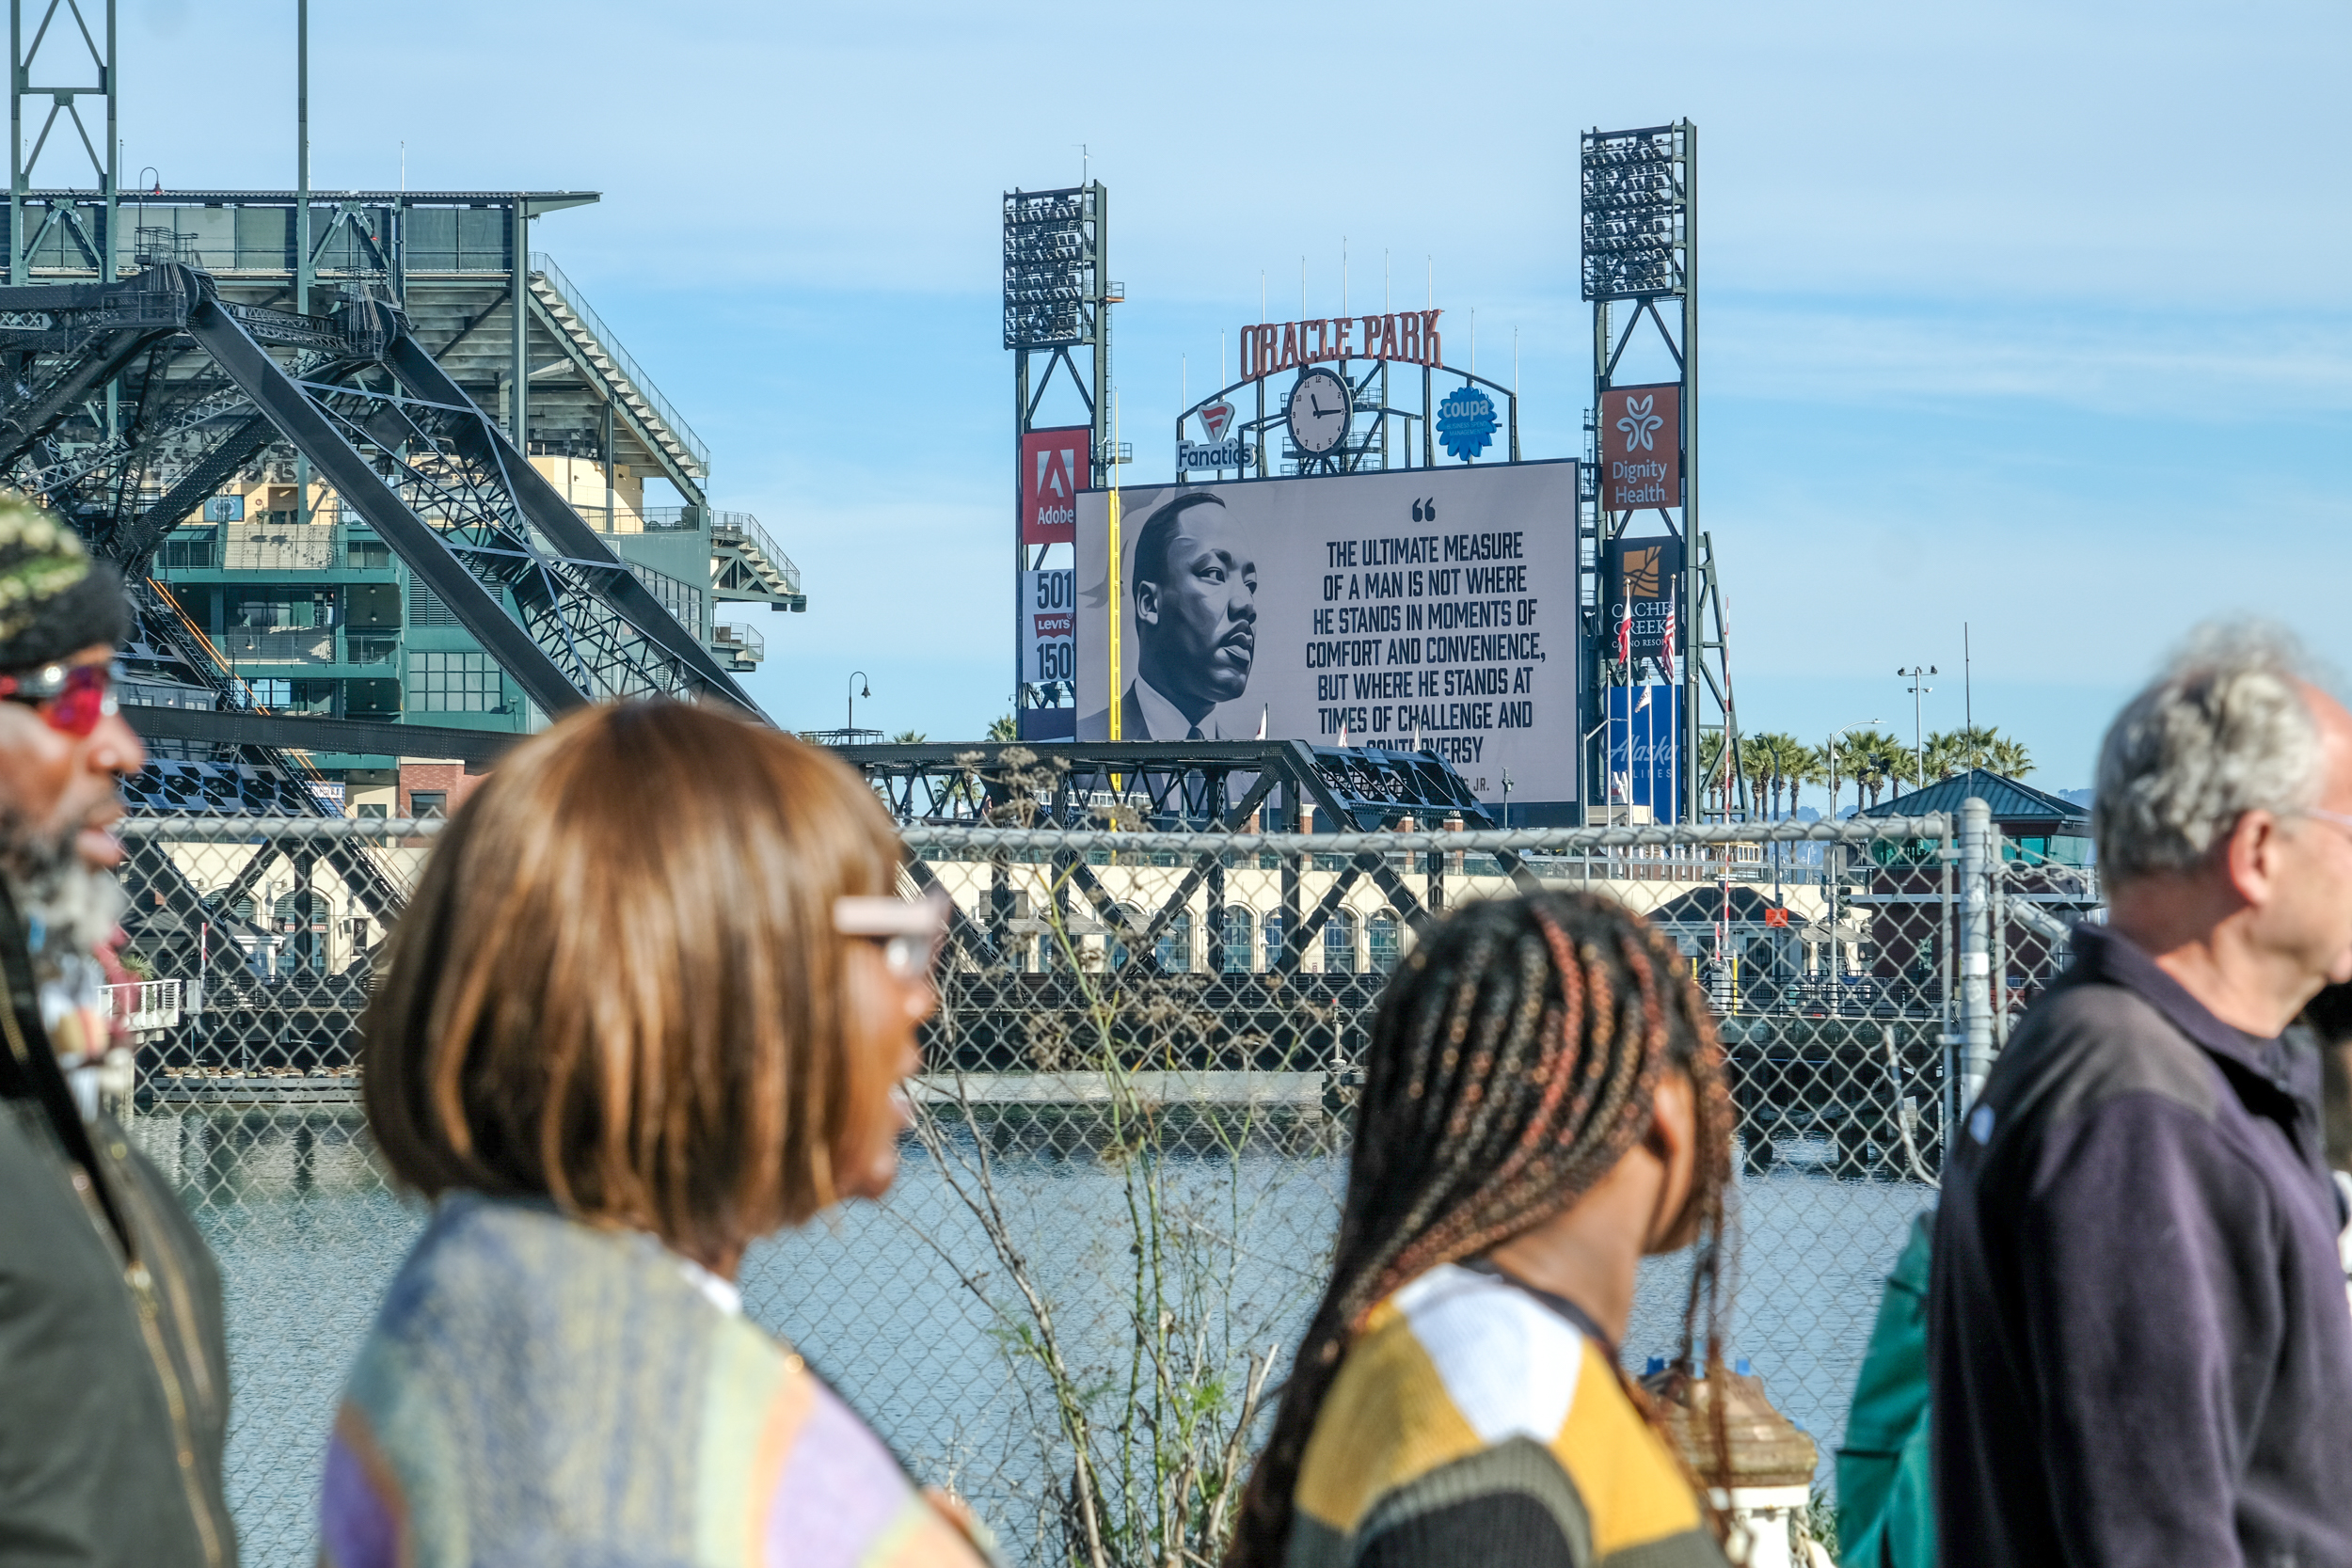 People view a ballpark with an MLK quote on the scoreboard overlooking water.